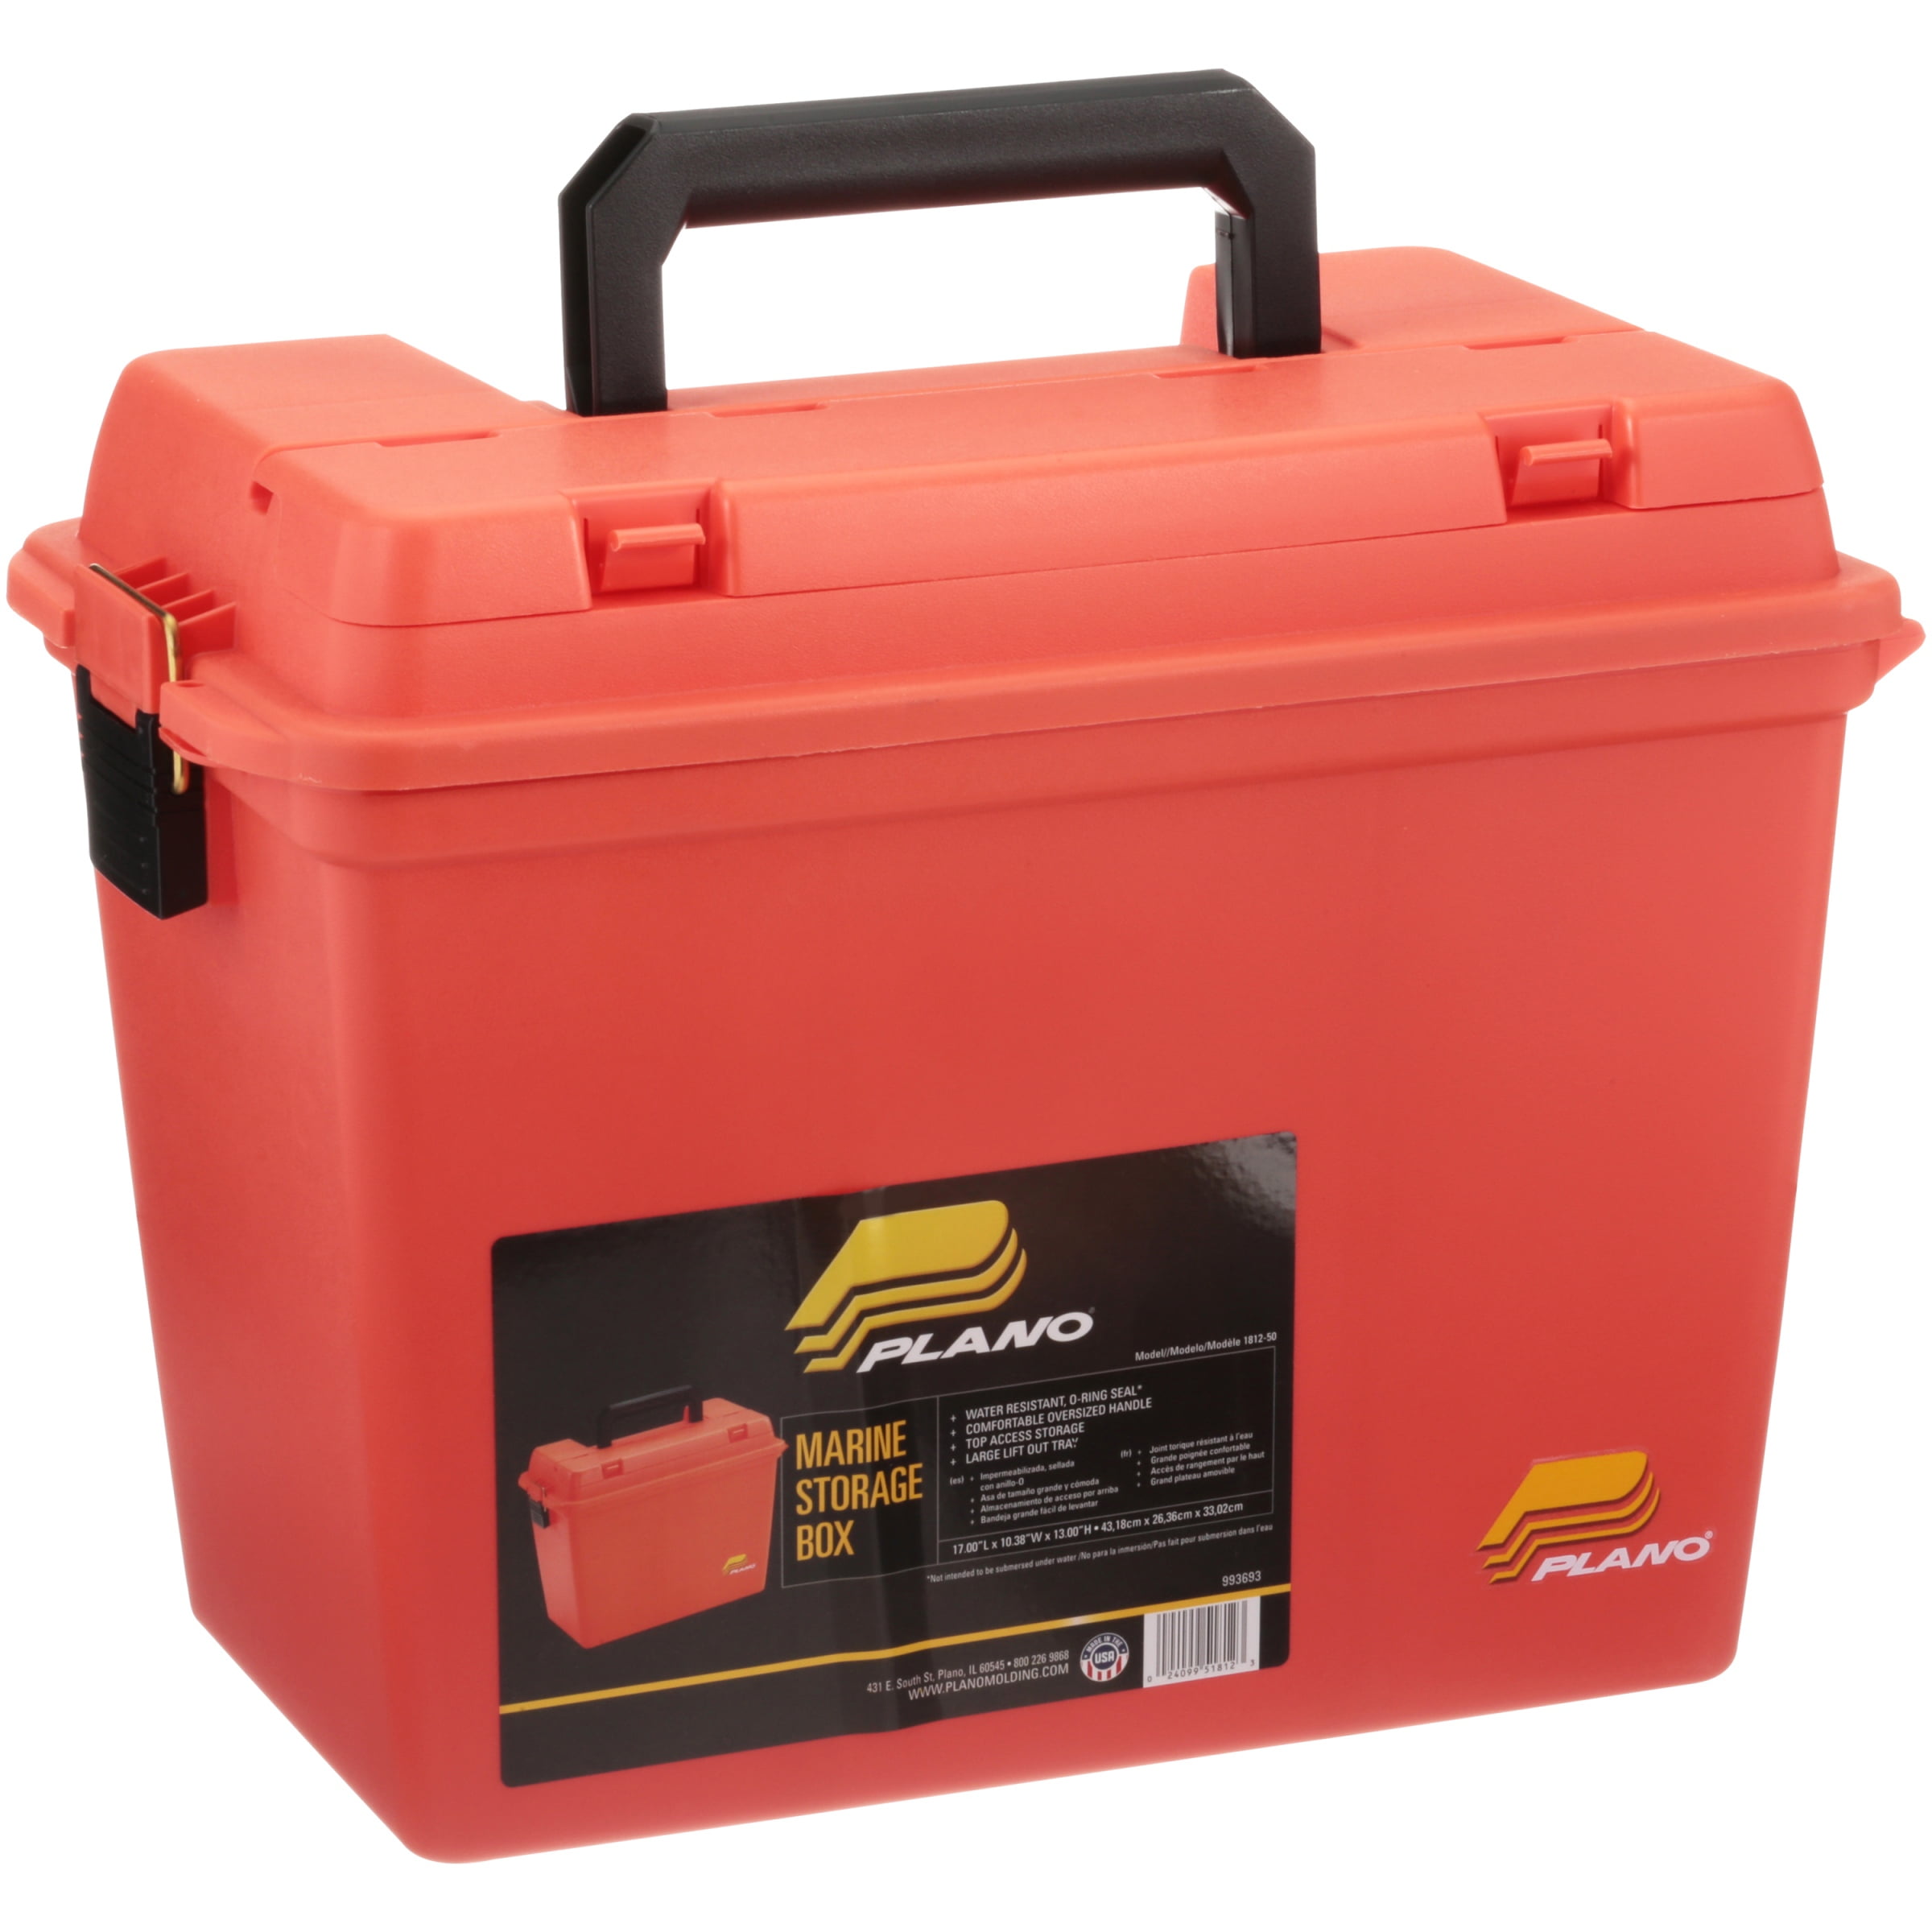 Water-resistant Plano Large Emergency and Marine Box 